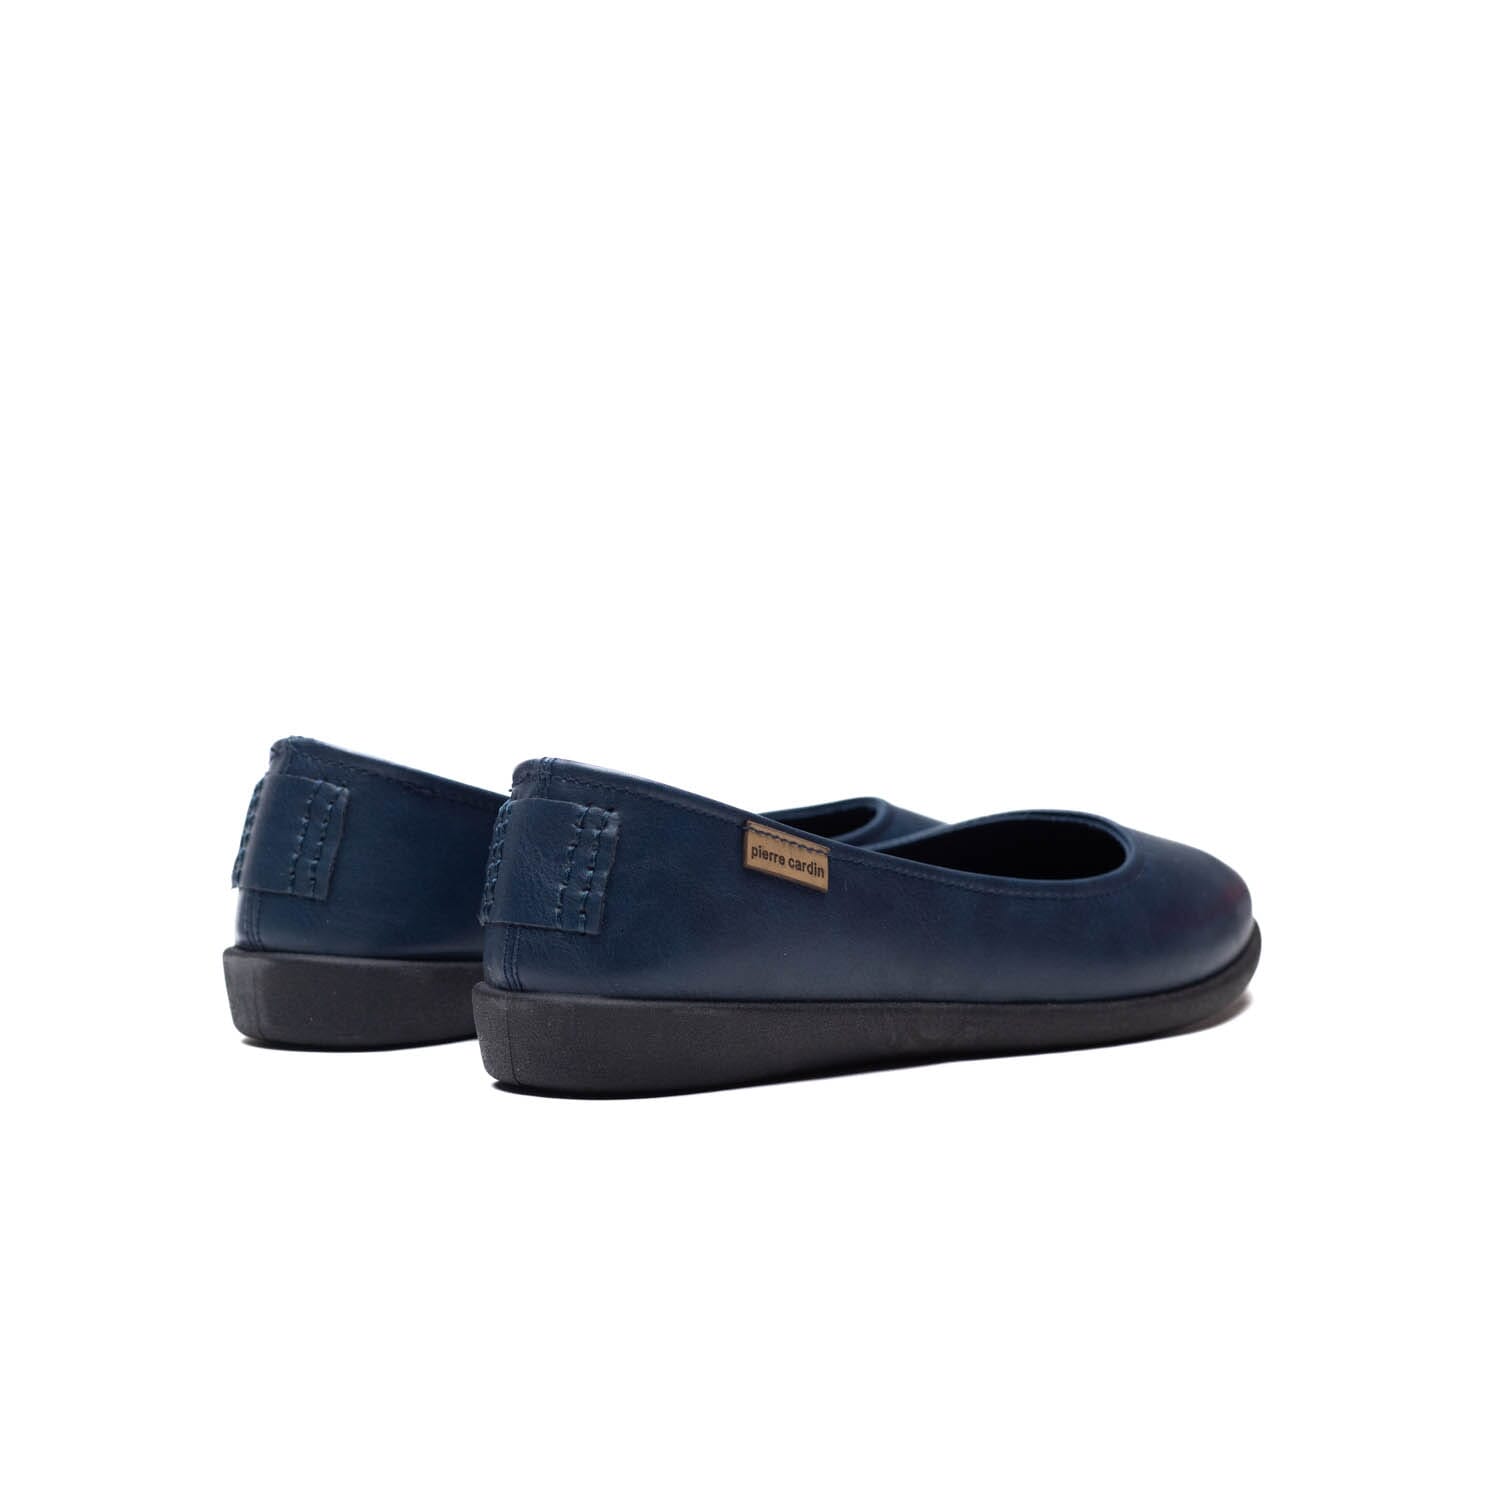 PIERRE CARDIN – PCL 611 -NAVY – Perocili Shoes